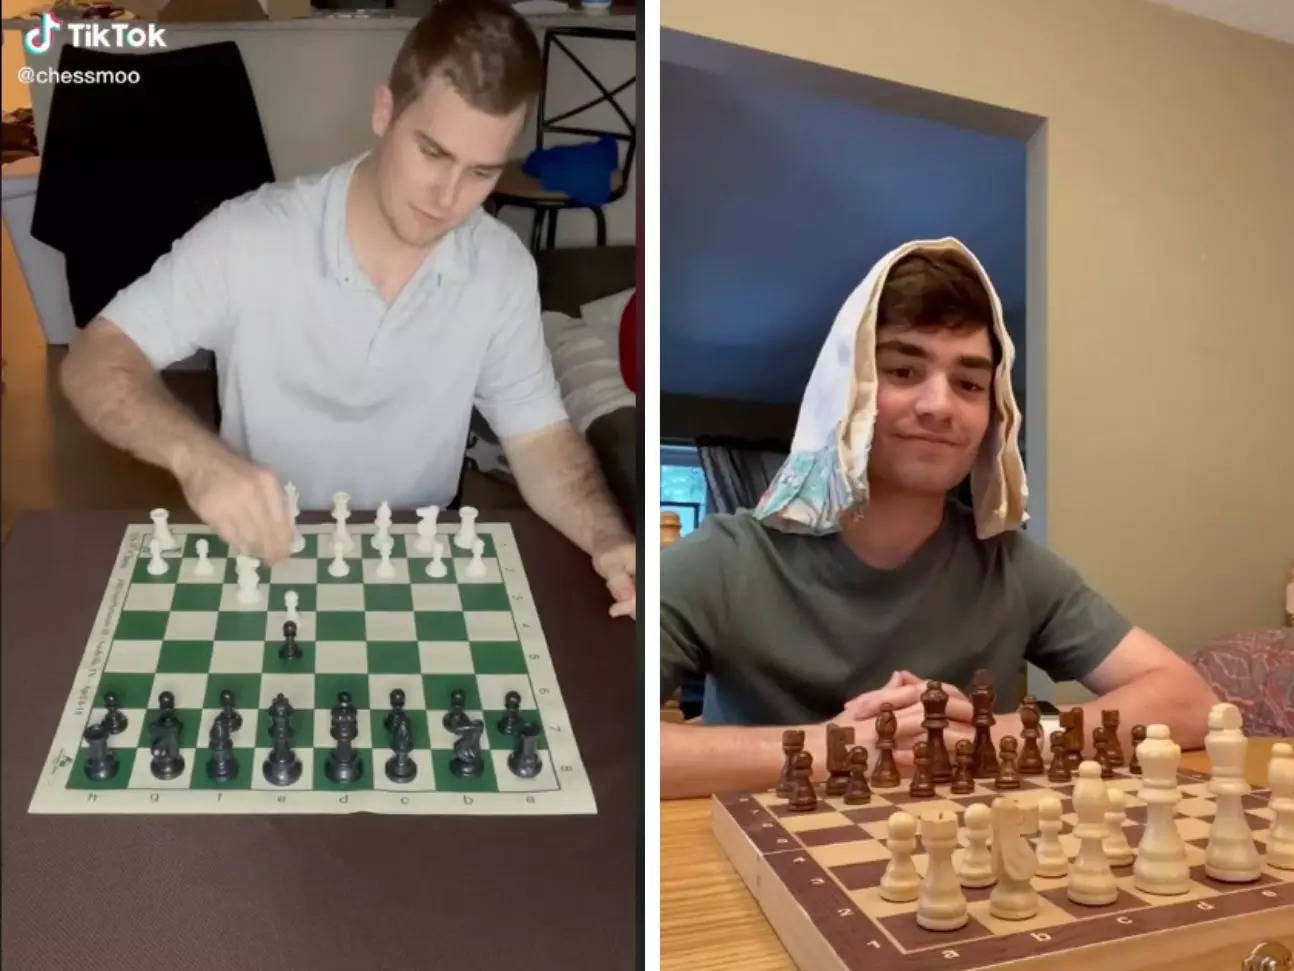 
Chess enthusiasts are flocking to TikTok, gaining millions of views with comedy skits and tutorials about the centuries-old game
